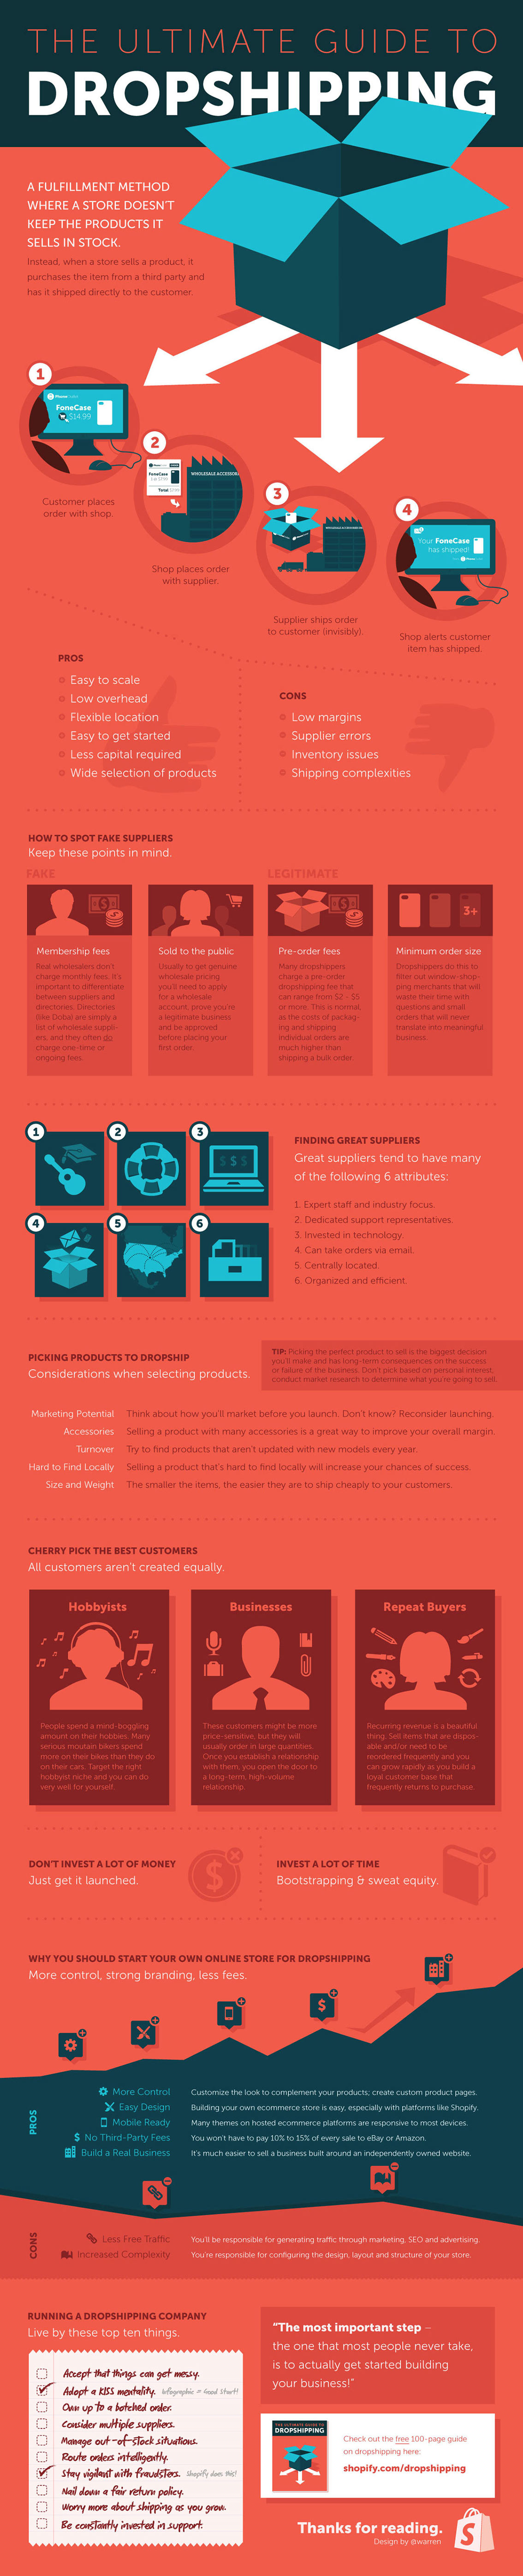 How to Make Money on Dropshipping Products - eCommerce Infographic